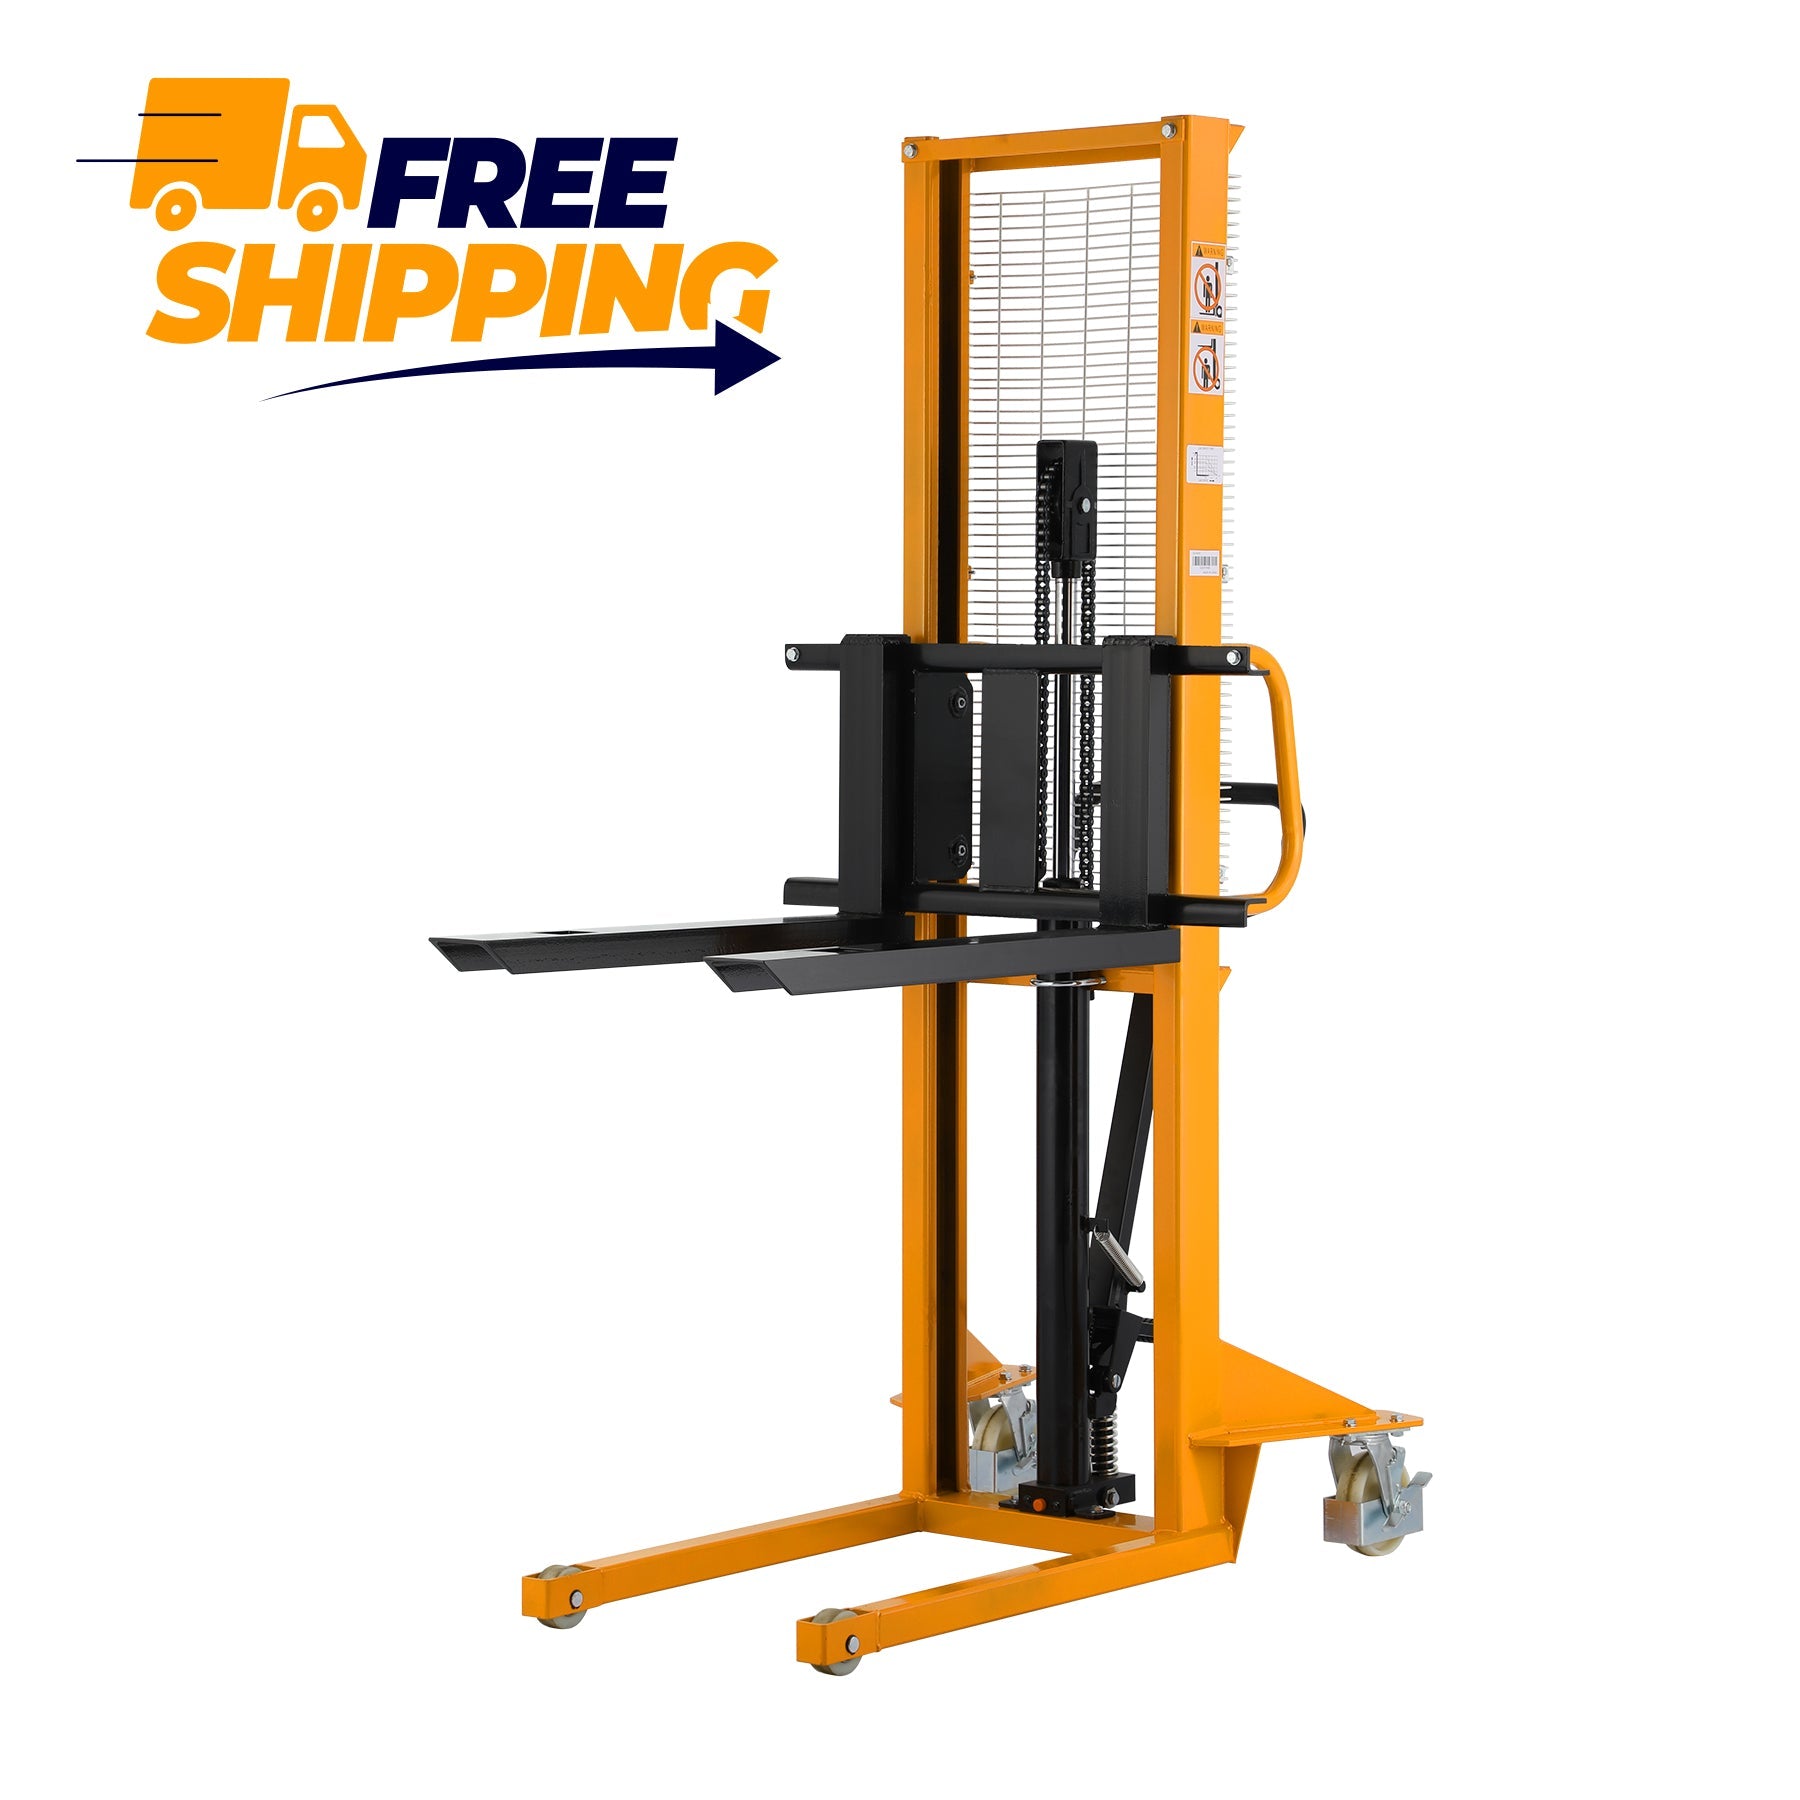 ApolloLift | Manual Pallet Stacker Adjustable Forks 1100lbs Cap. 63" Lift Height A-3002